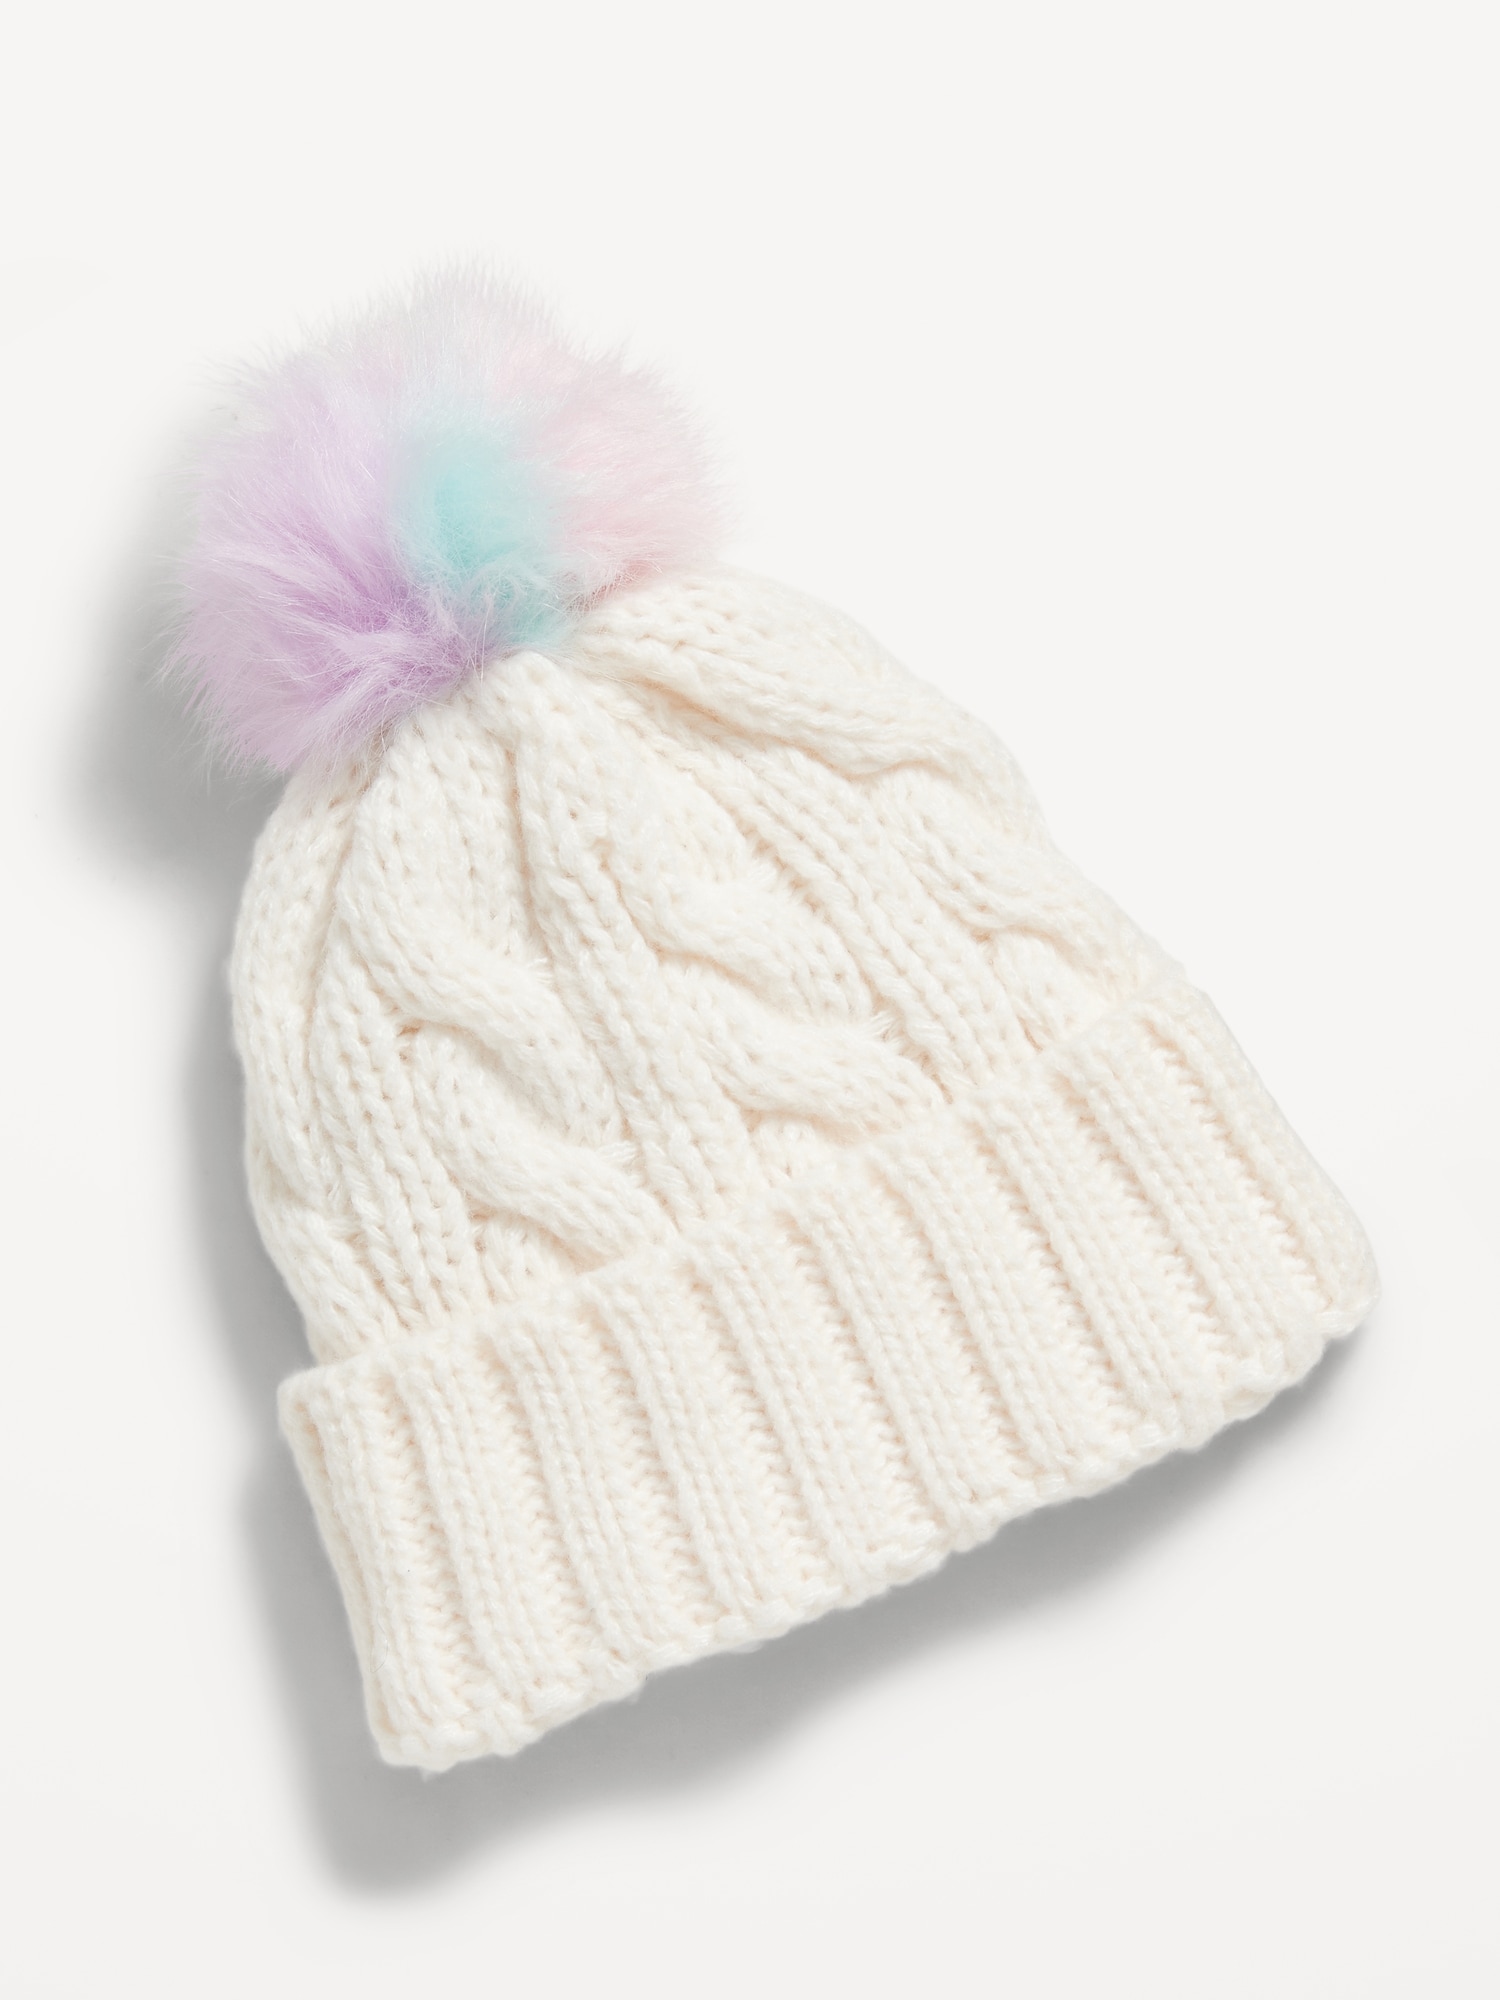 Winter Fashion Womens Cotton Knitted Pom Pom Hat Soft And Cozy